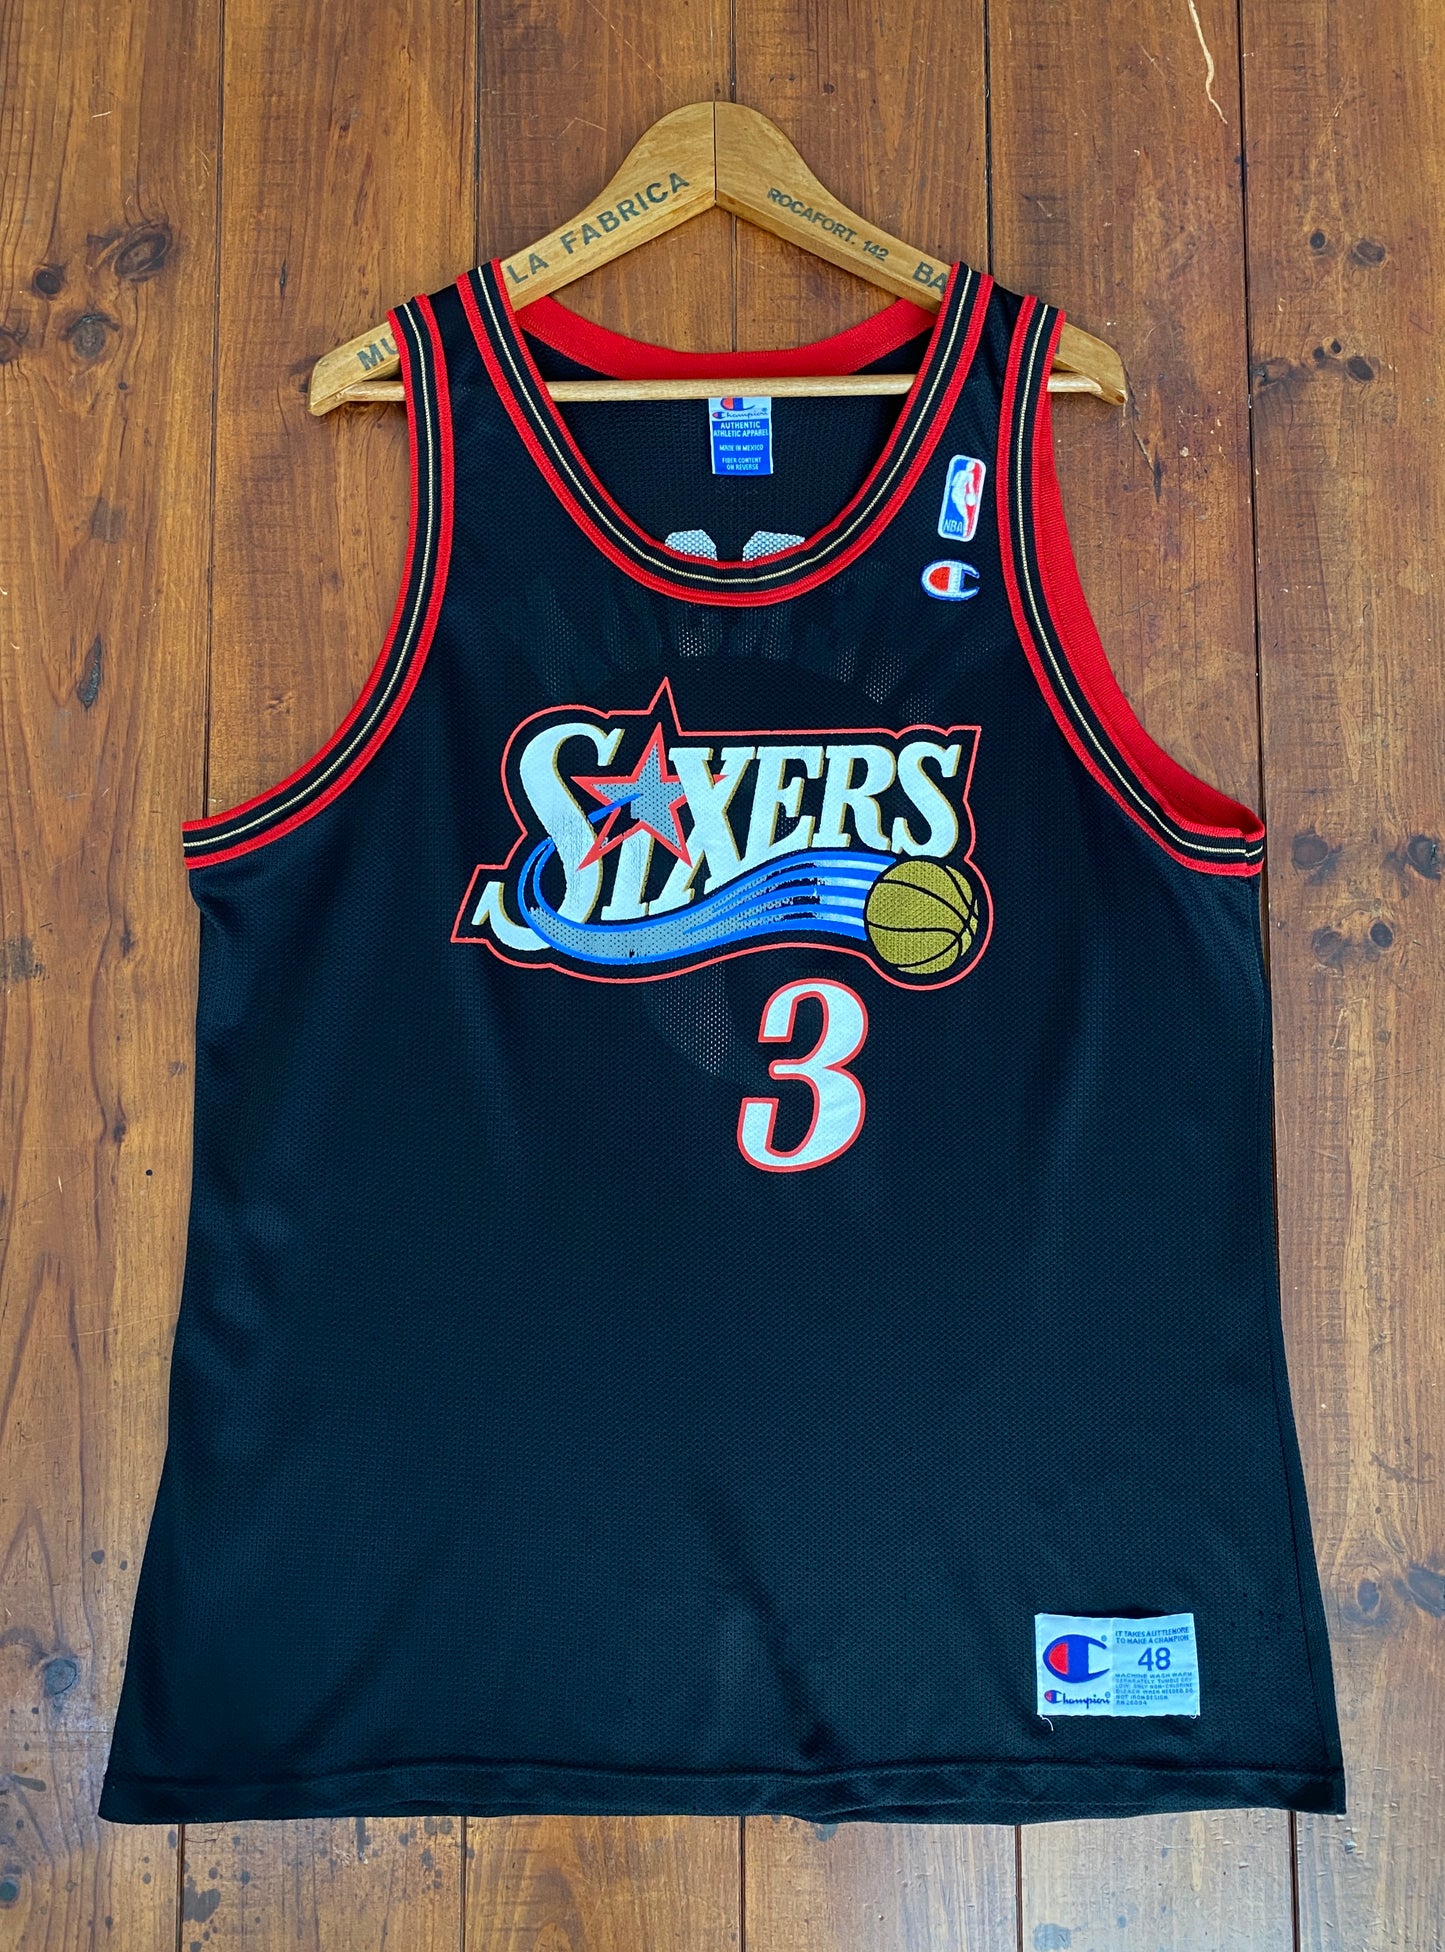 90s Vintage Sixters NBA Jersey - #3 Iverson - Made by Champion - Size 48